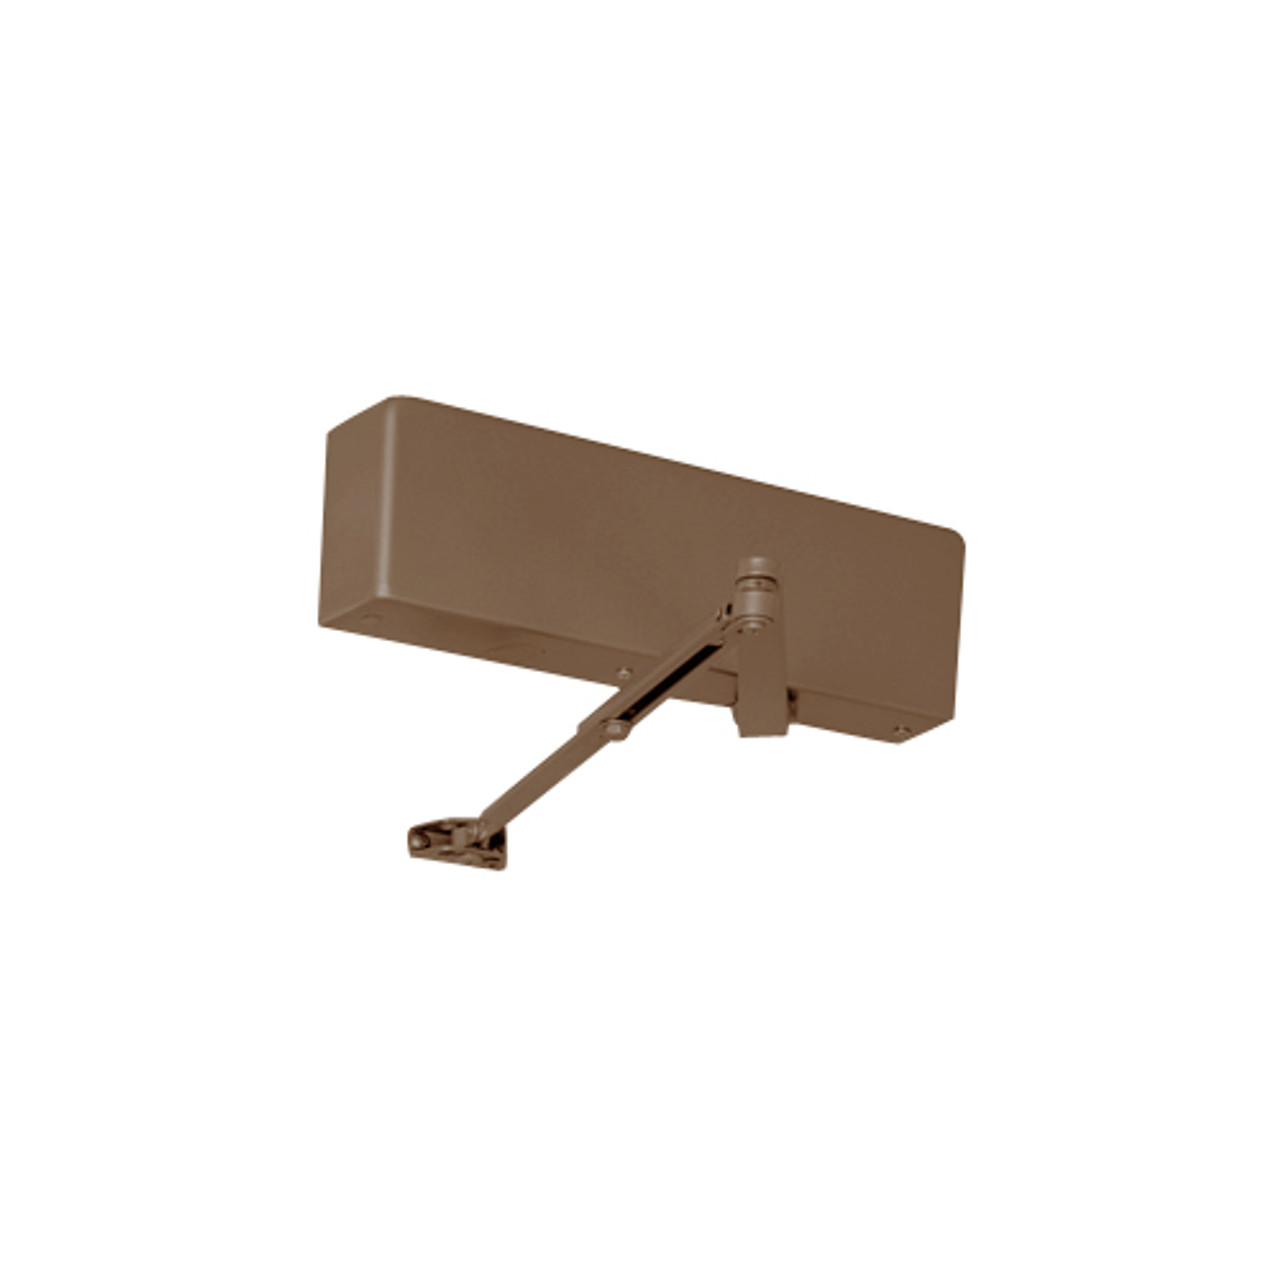 JL7500HDA-691 Norton 7500 Series Hold Open Institutional Door Closer with Top Jamb Only Reveals 2-3/4 to 6-3/4 inch to 180 Degree in Dull Bronze Finish